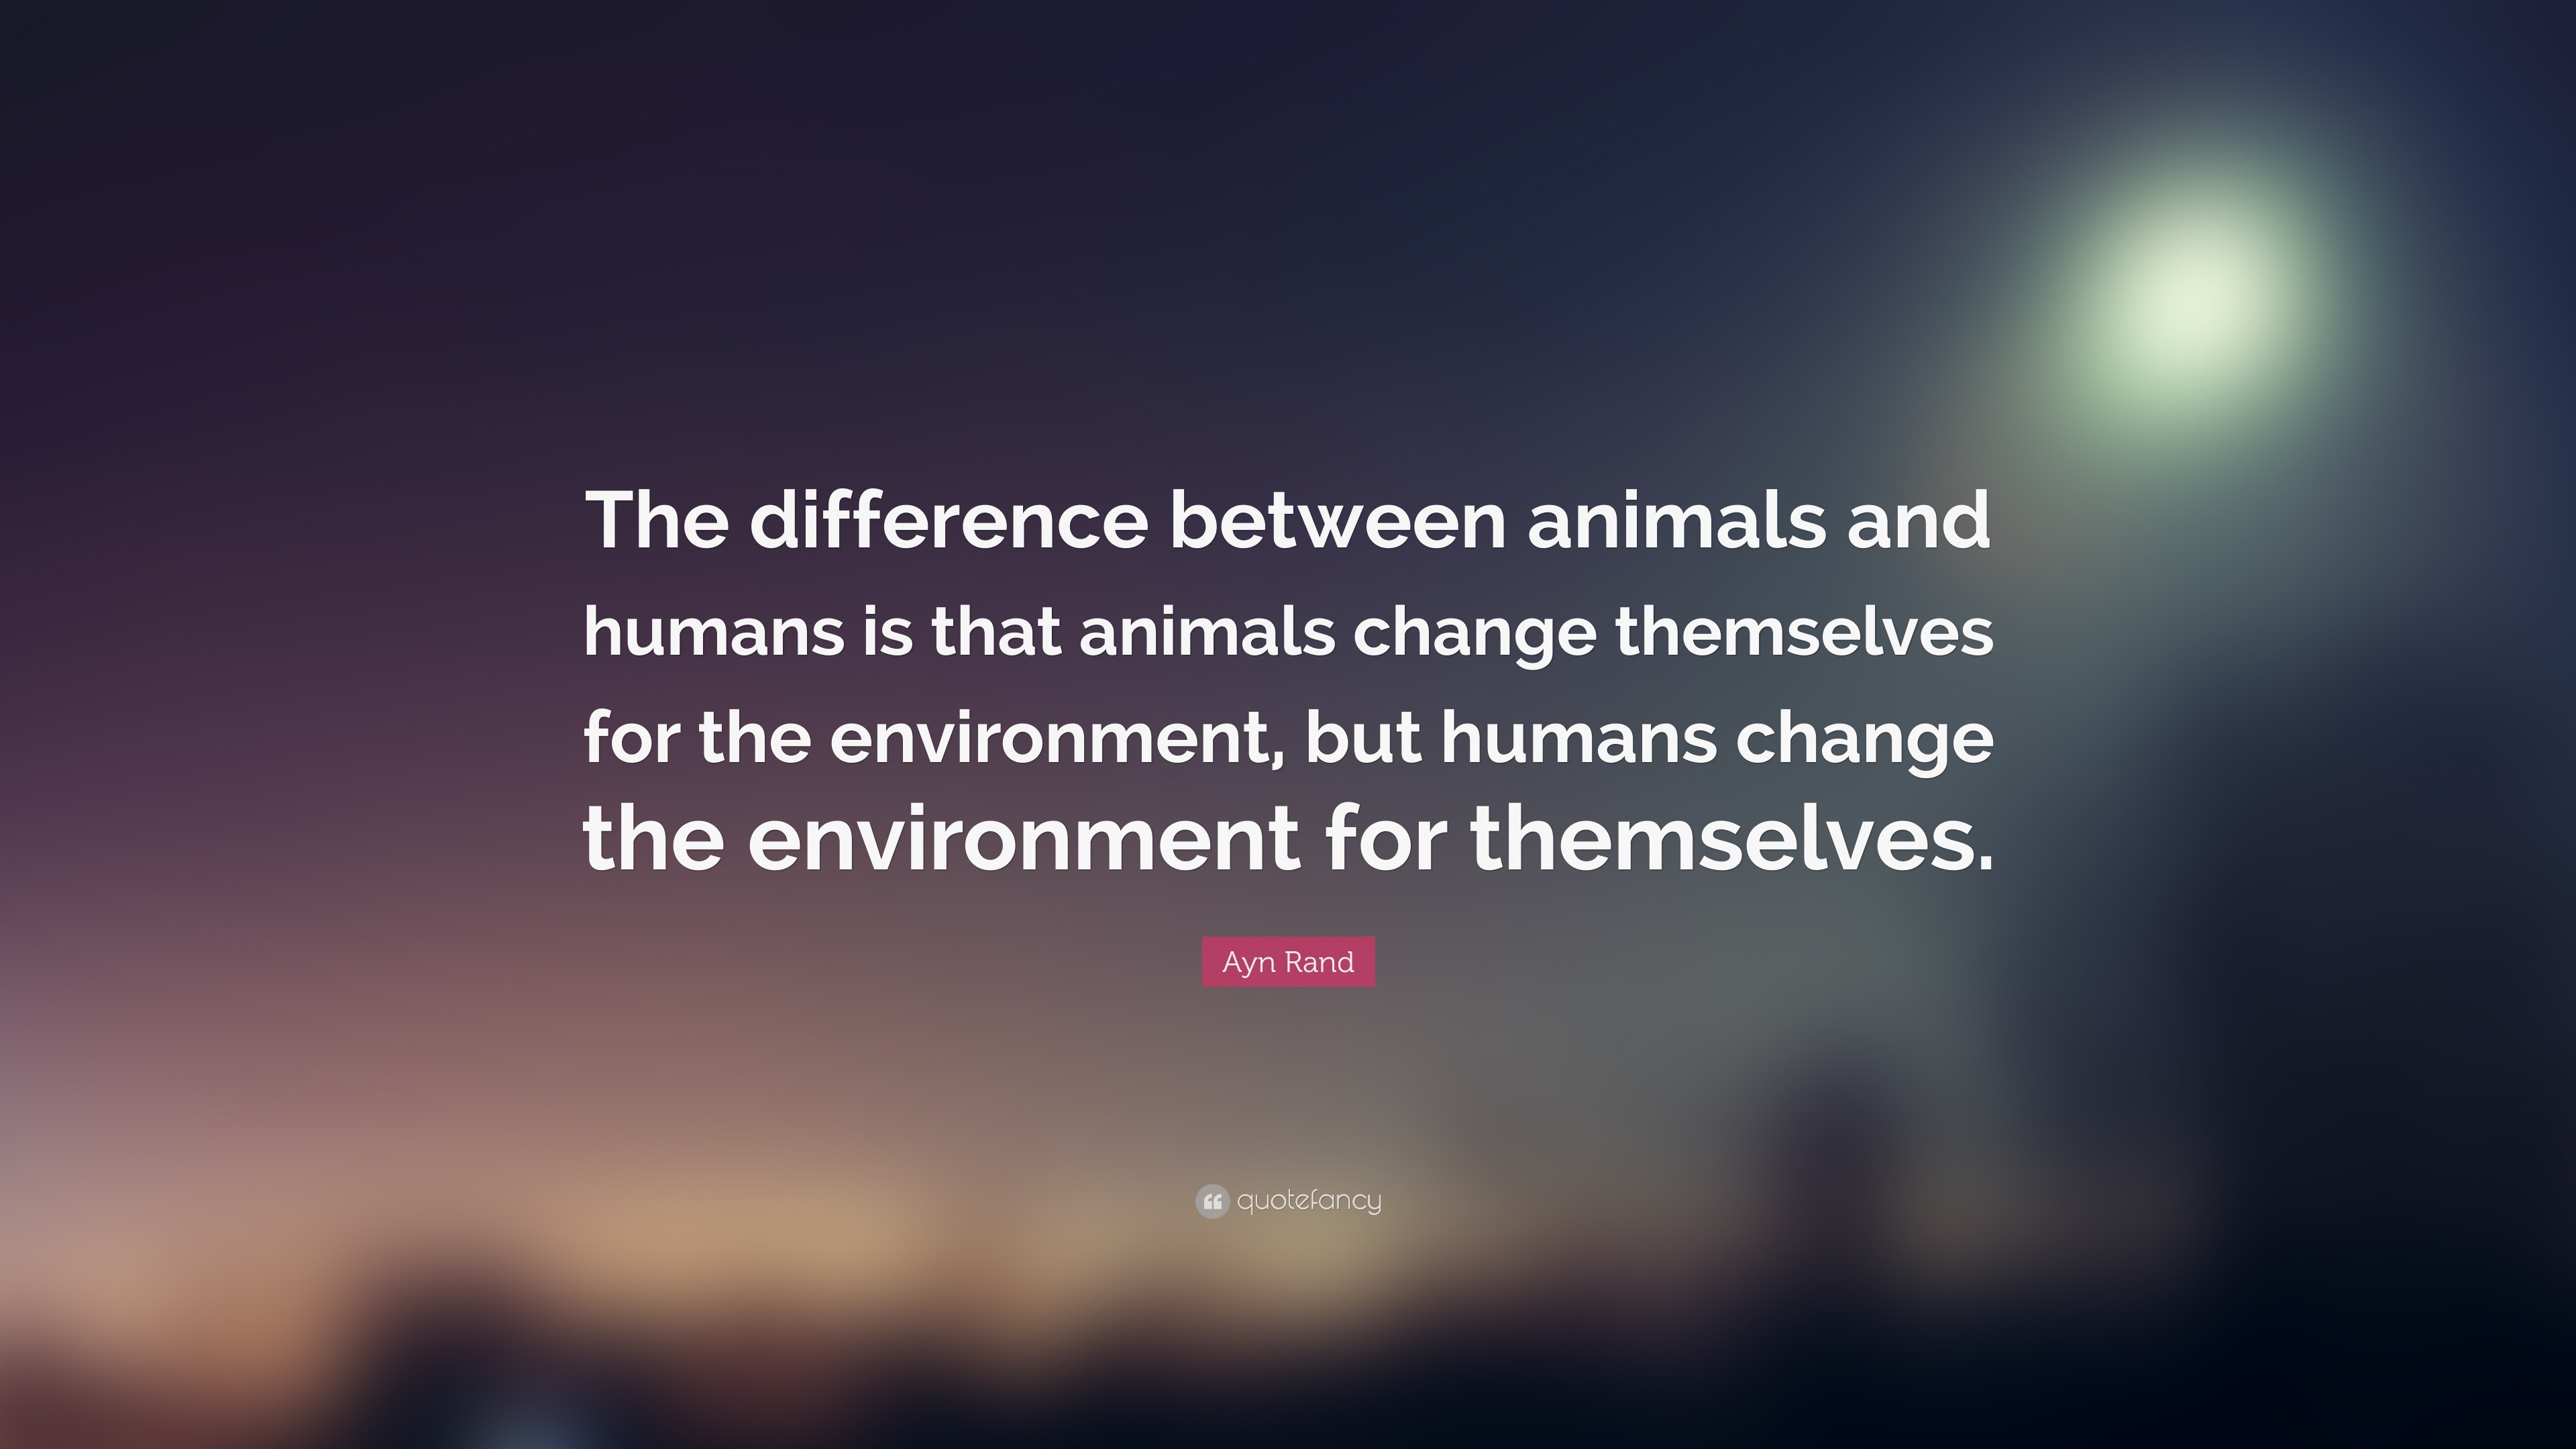 Ayn Rand Quote: “The difference between animals and humans is that animals  change themselves for the environment, but humans change the e...”